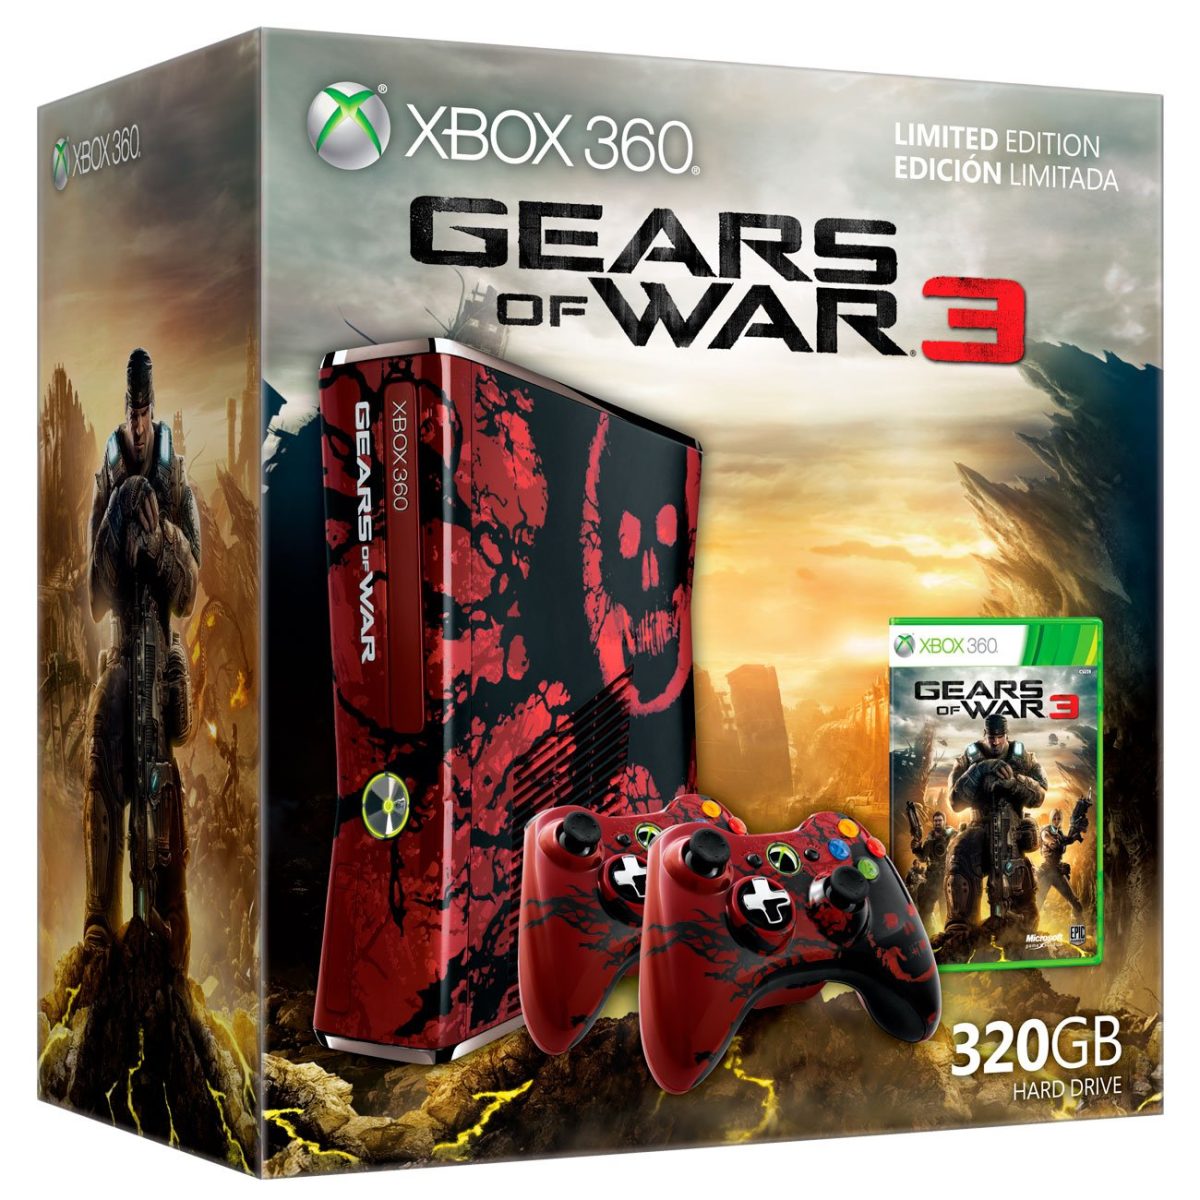 Xbox 360 Gears of War 3 Limited Edition Console Bundle With Kinect